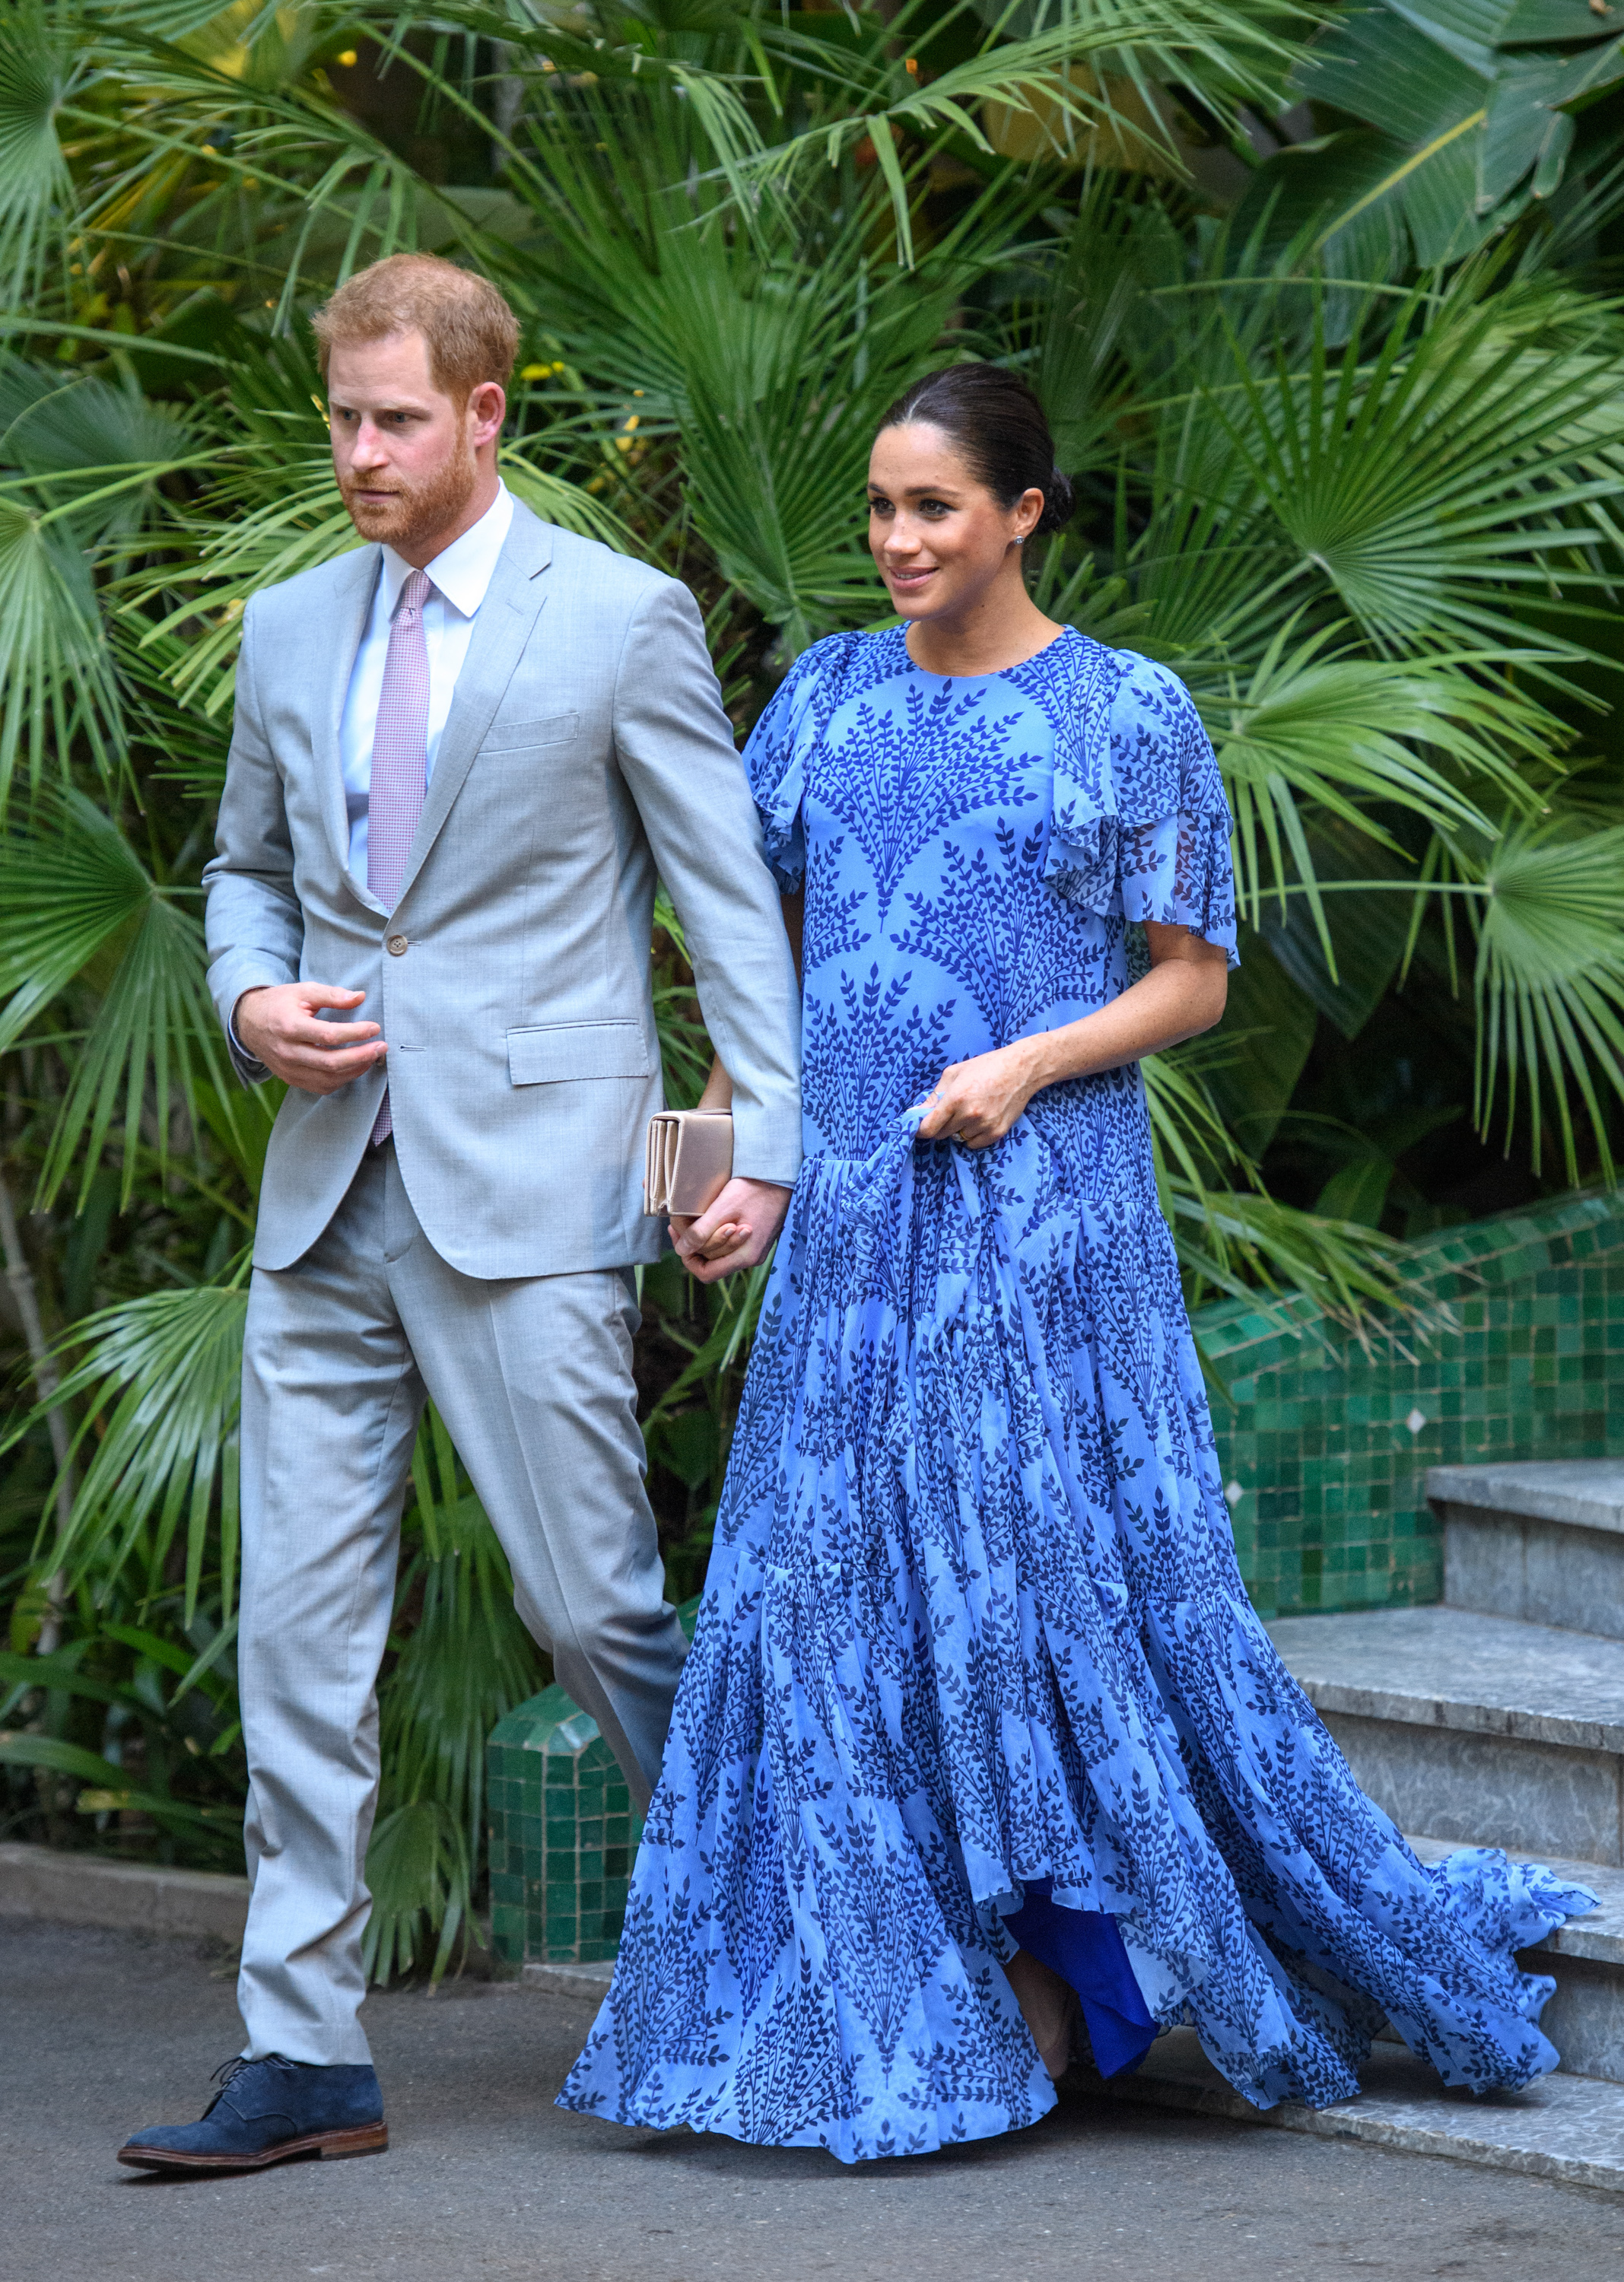 Meghan Markle Sports Gorgeous Gown to Meet the King of Morocco